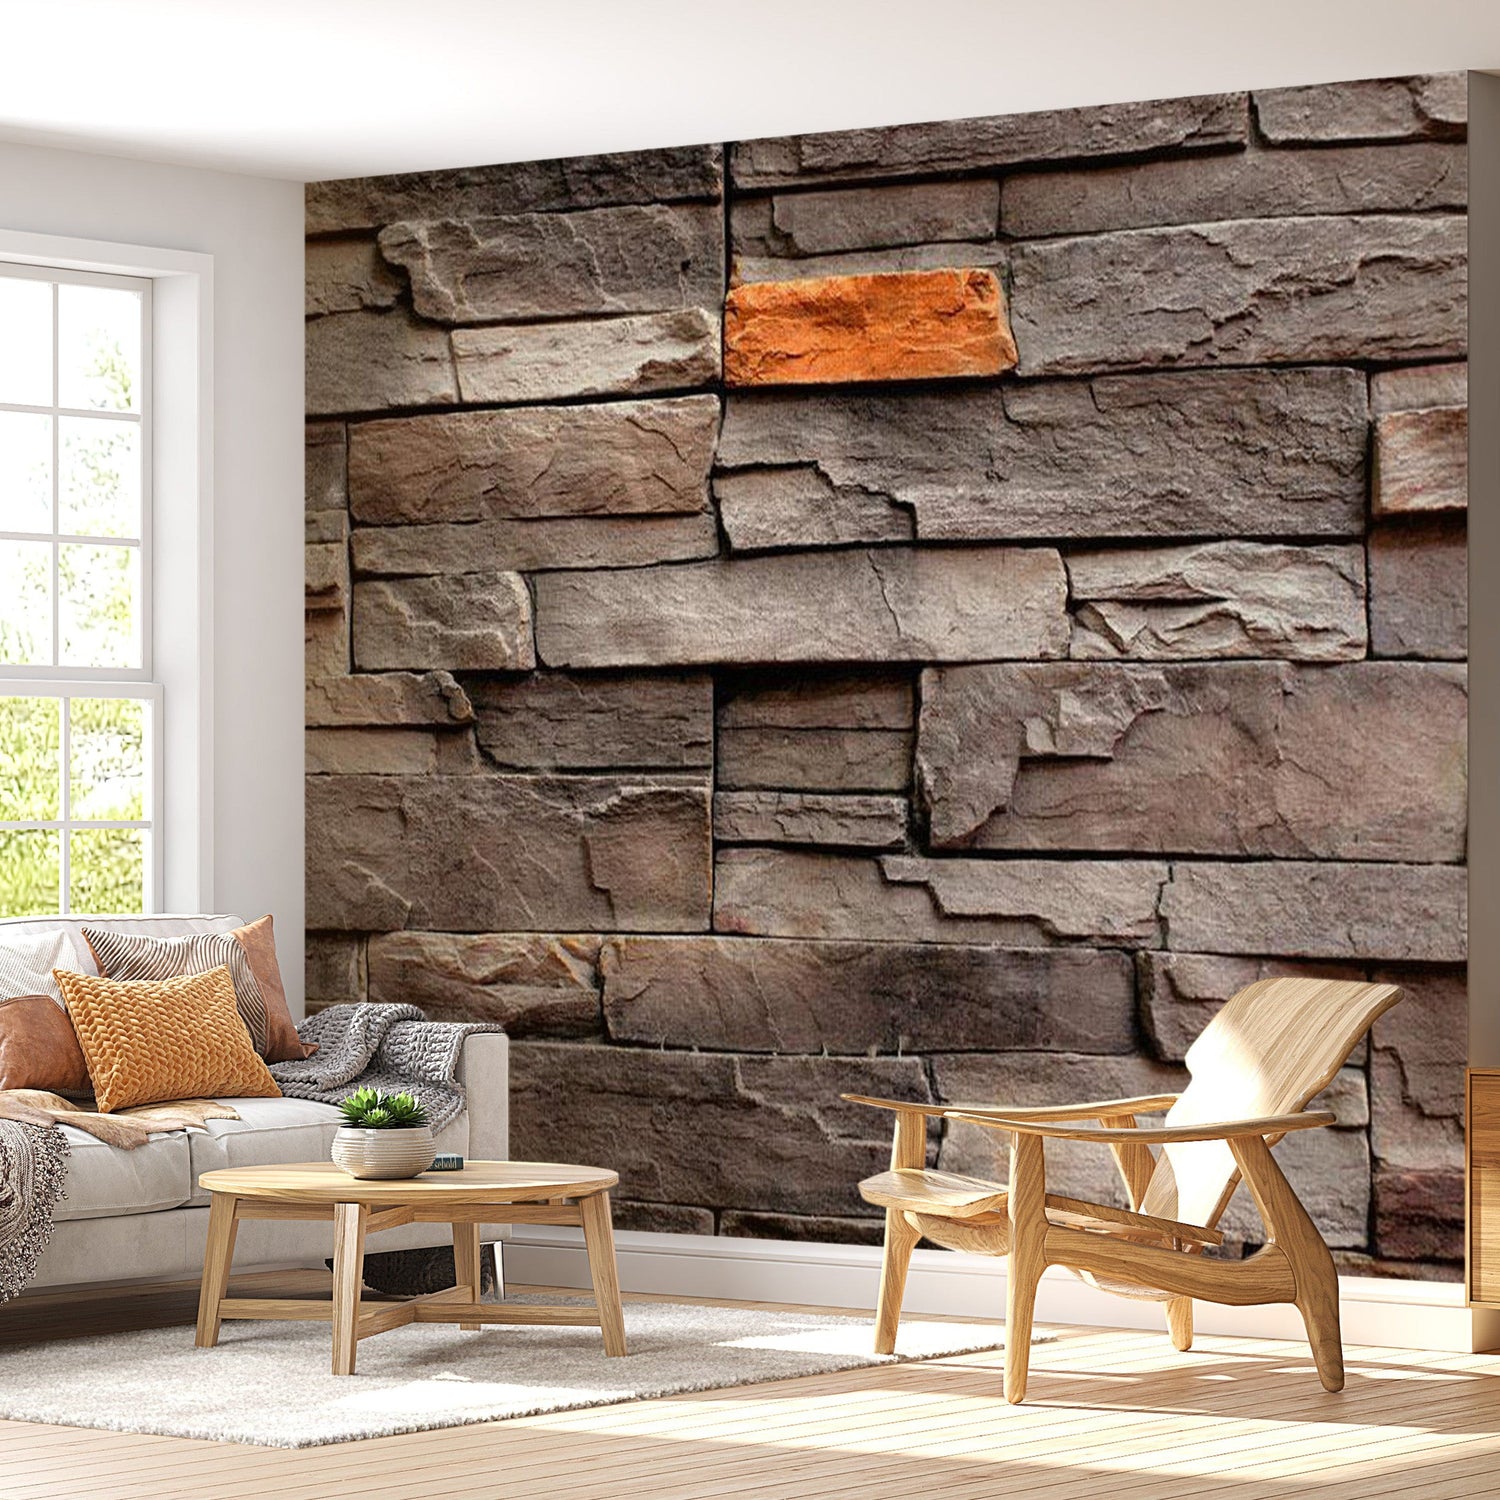 Peel & Stick Wall Mural - Big Brown Slate Tiles - Removable Wall Decals